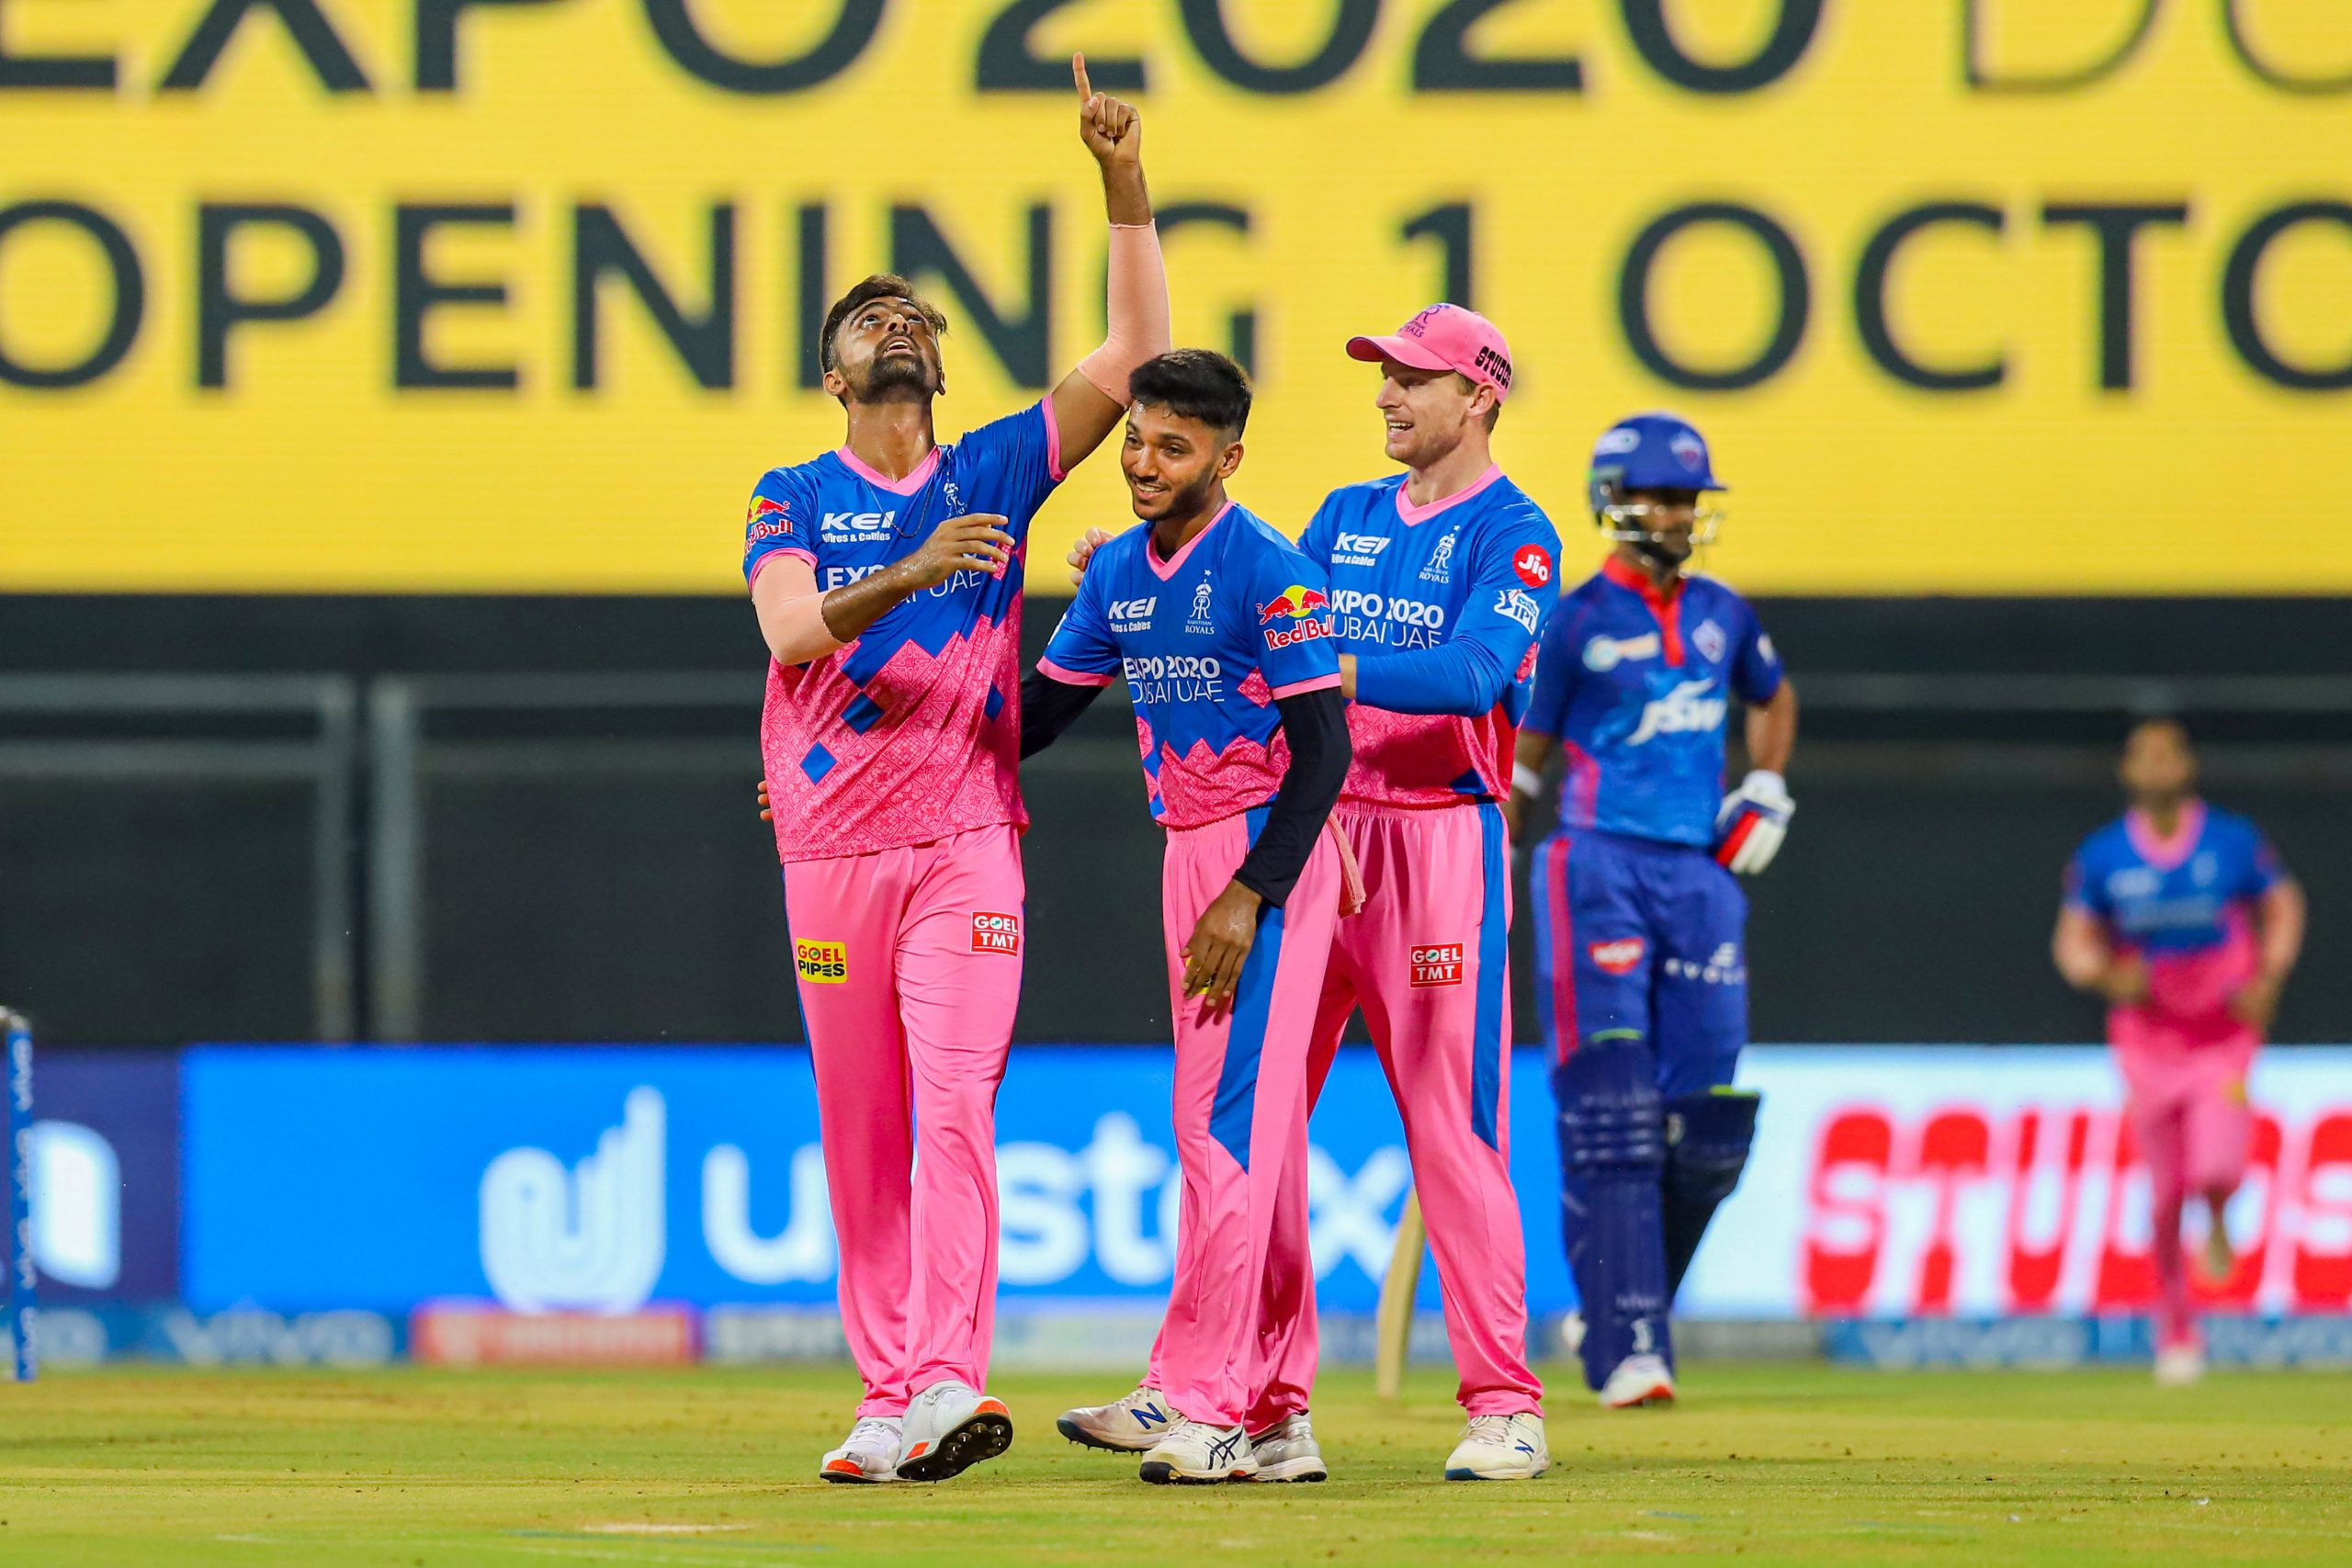 IPL 2021, DC vs RR: When and where to watch live telecast, streaming